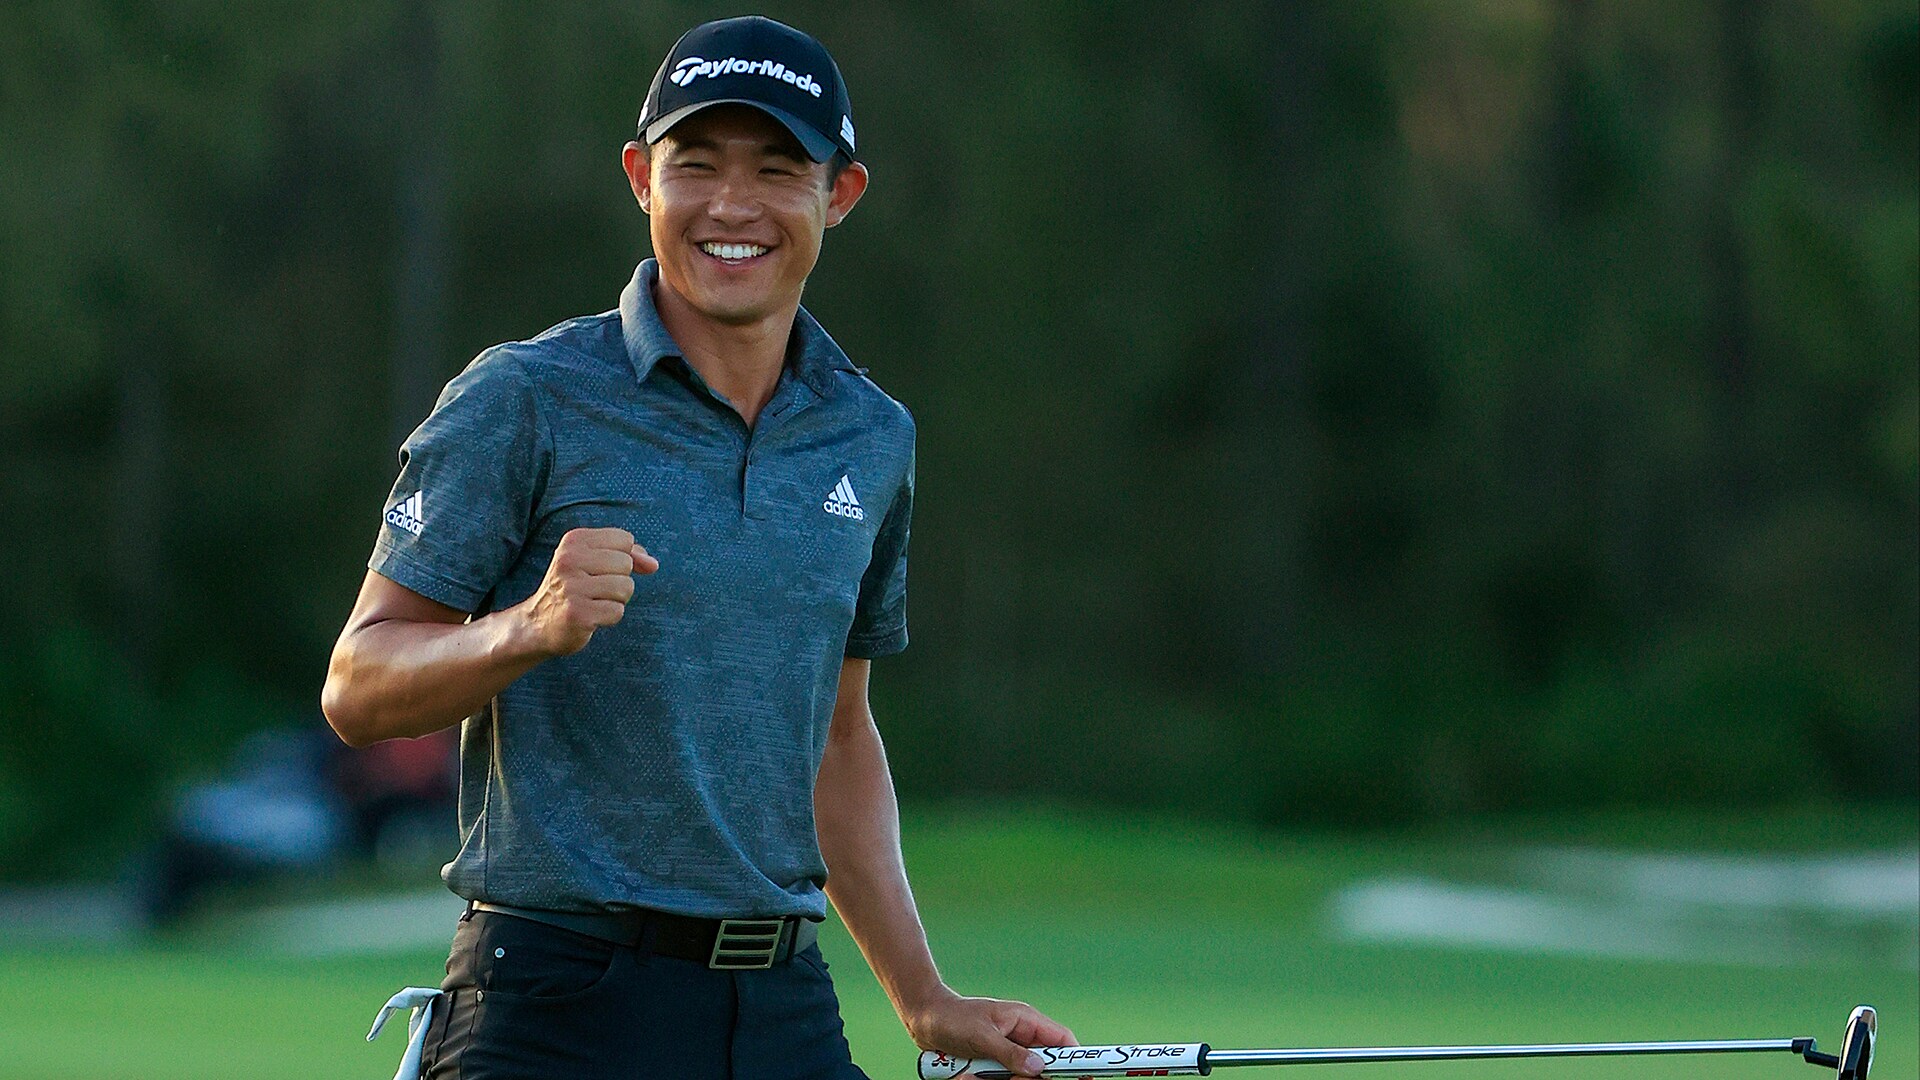 WGC-Workday payout: Collin Morikawa clears $1.8 million at Concession